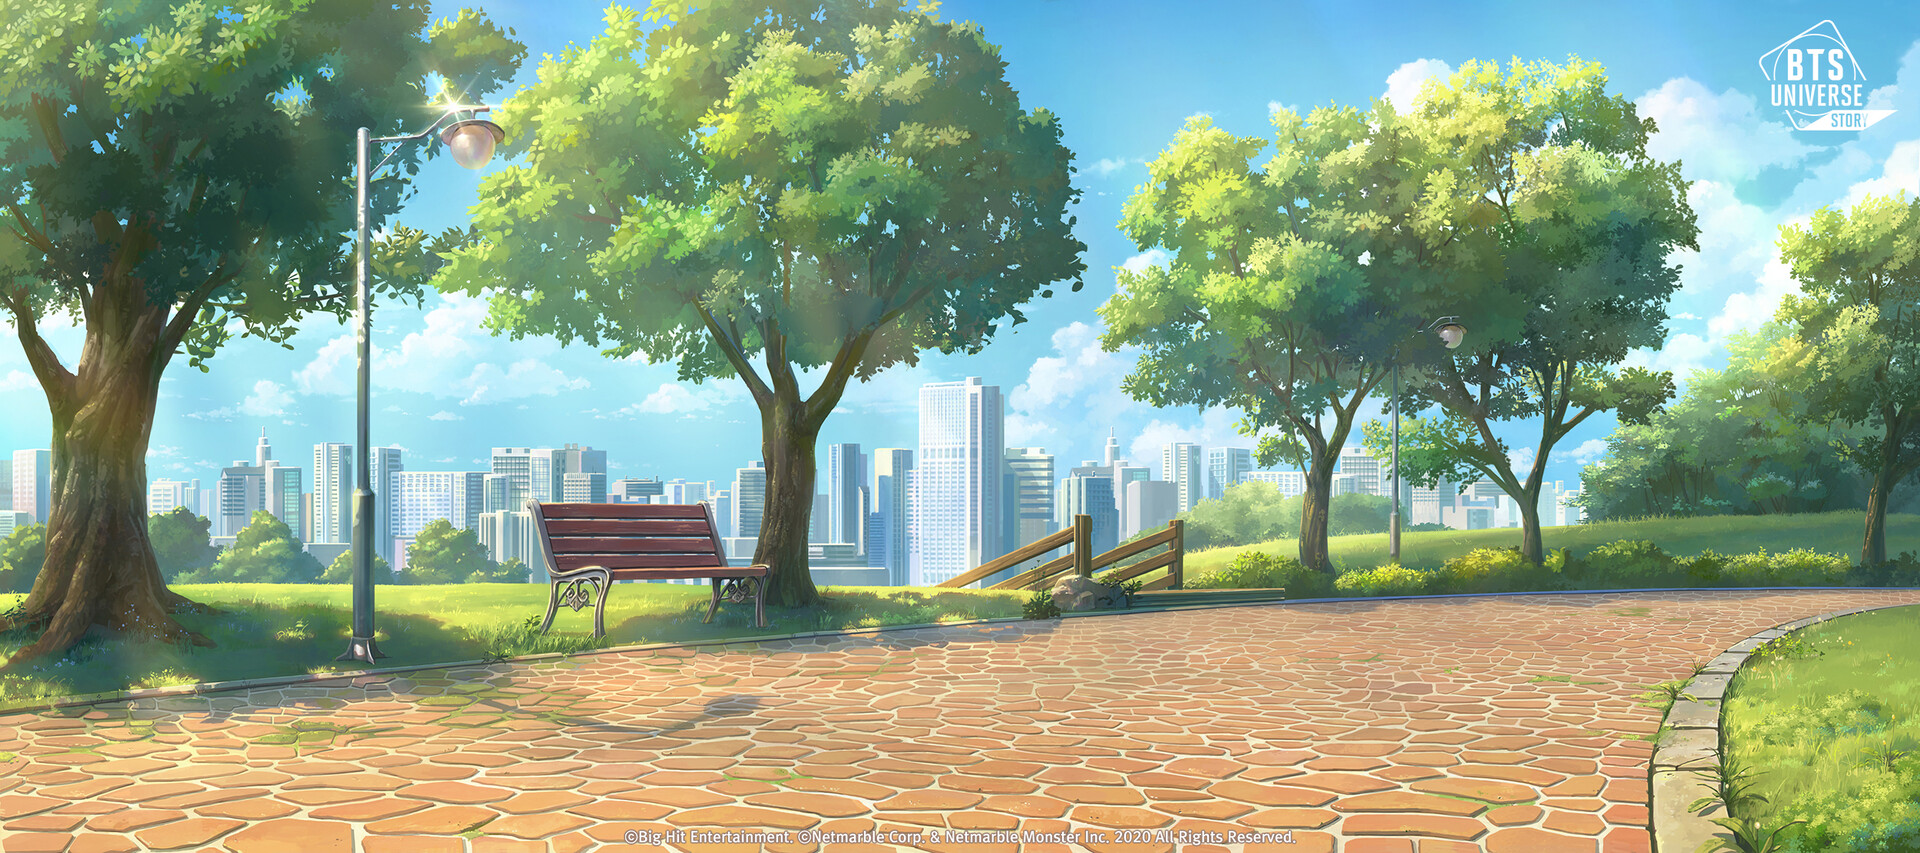 Park Anime Background Images HD Pictures and Wallpaper For Free Download   Pngtree